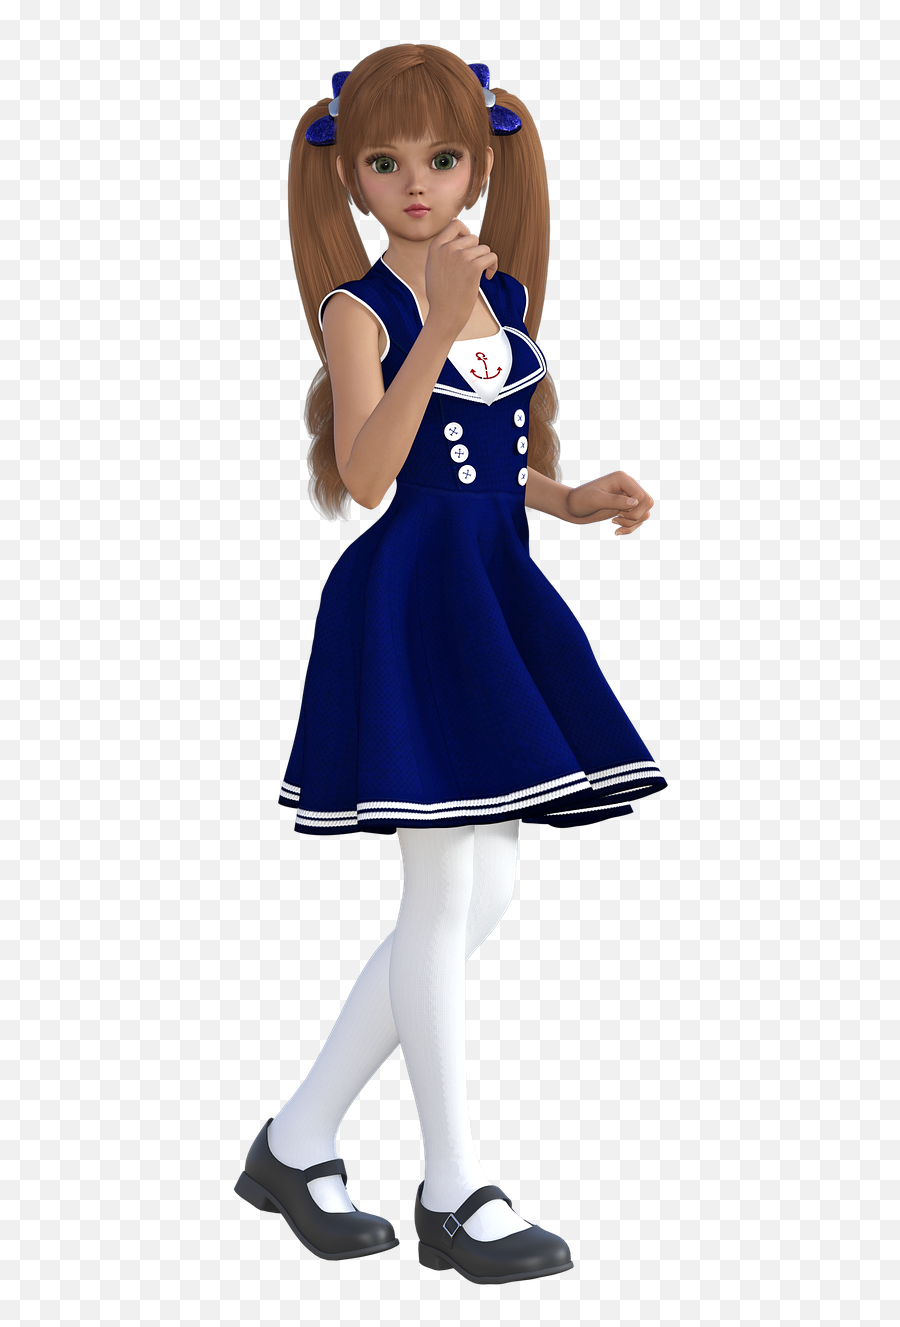 Girl Png Female 3d Model - Free Image On Pixabay 3d Anime Girl Png,Anime Png